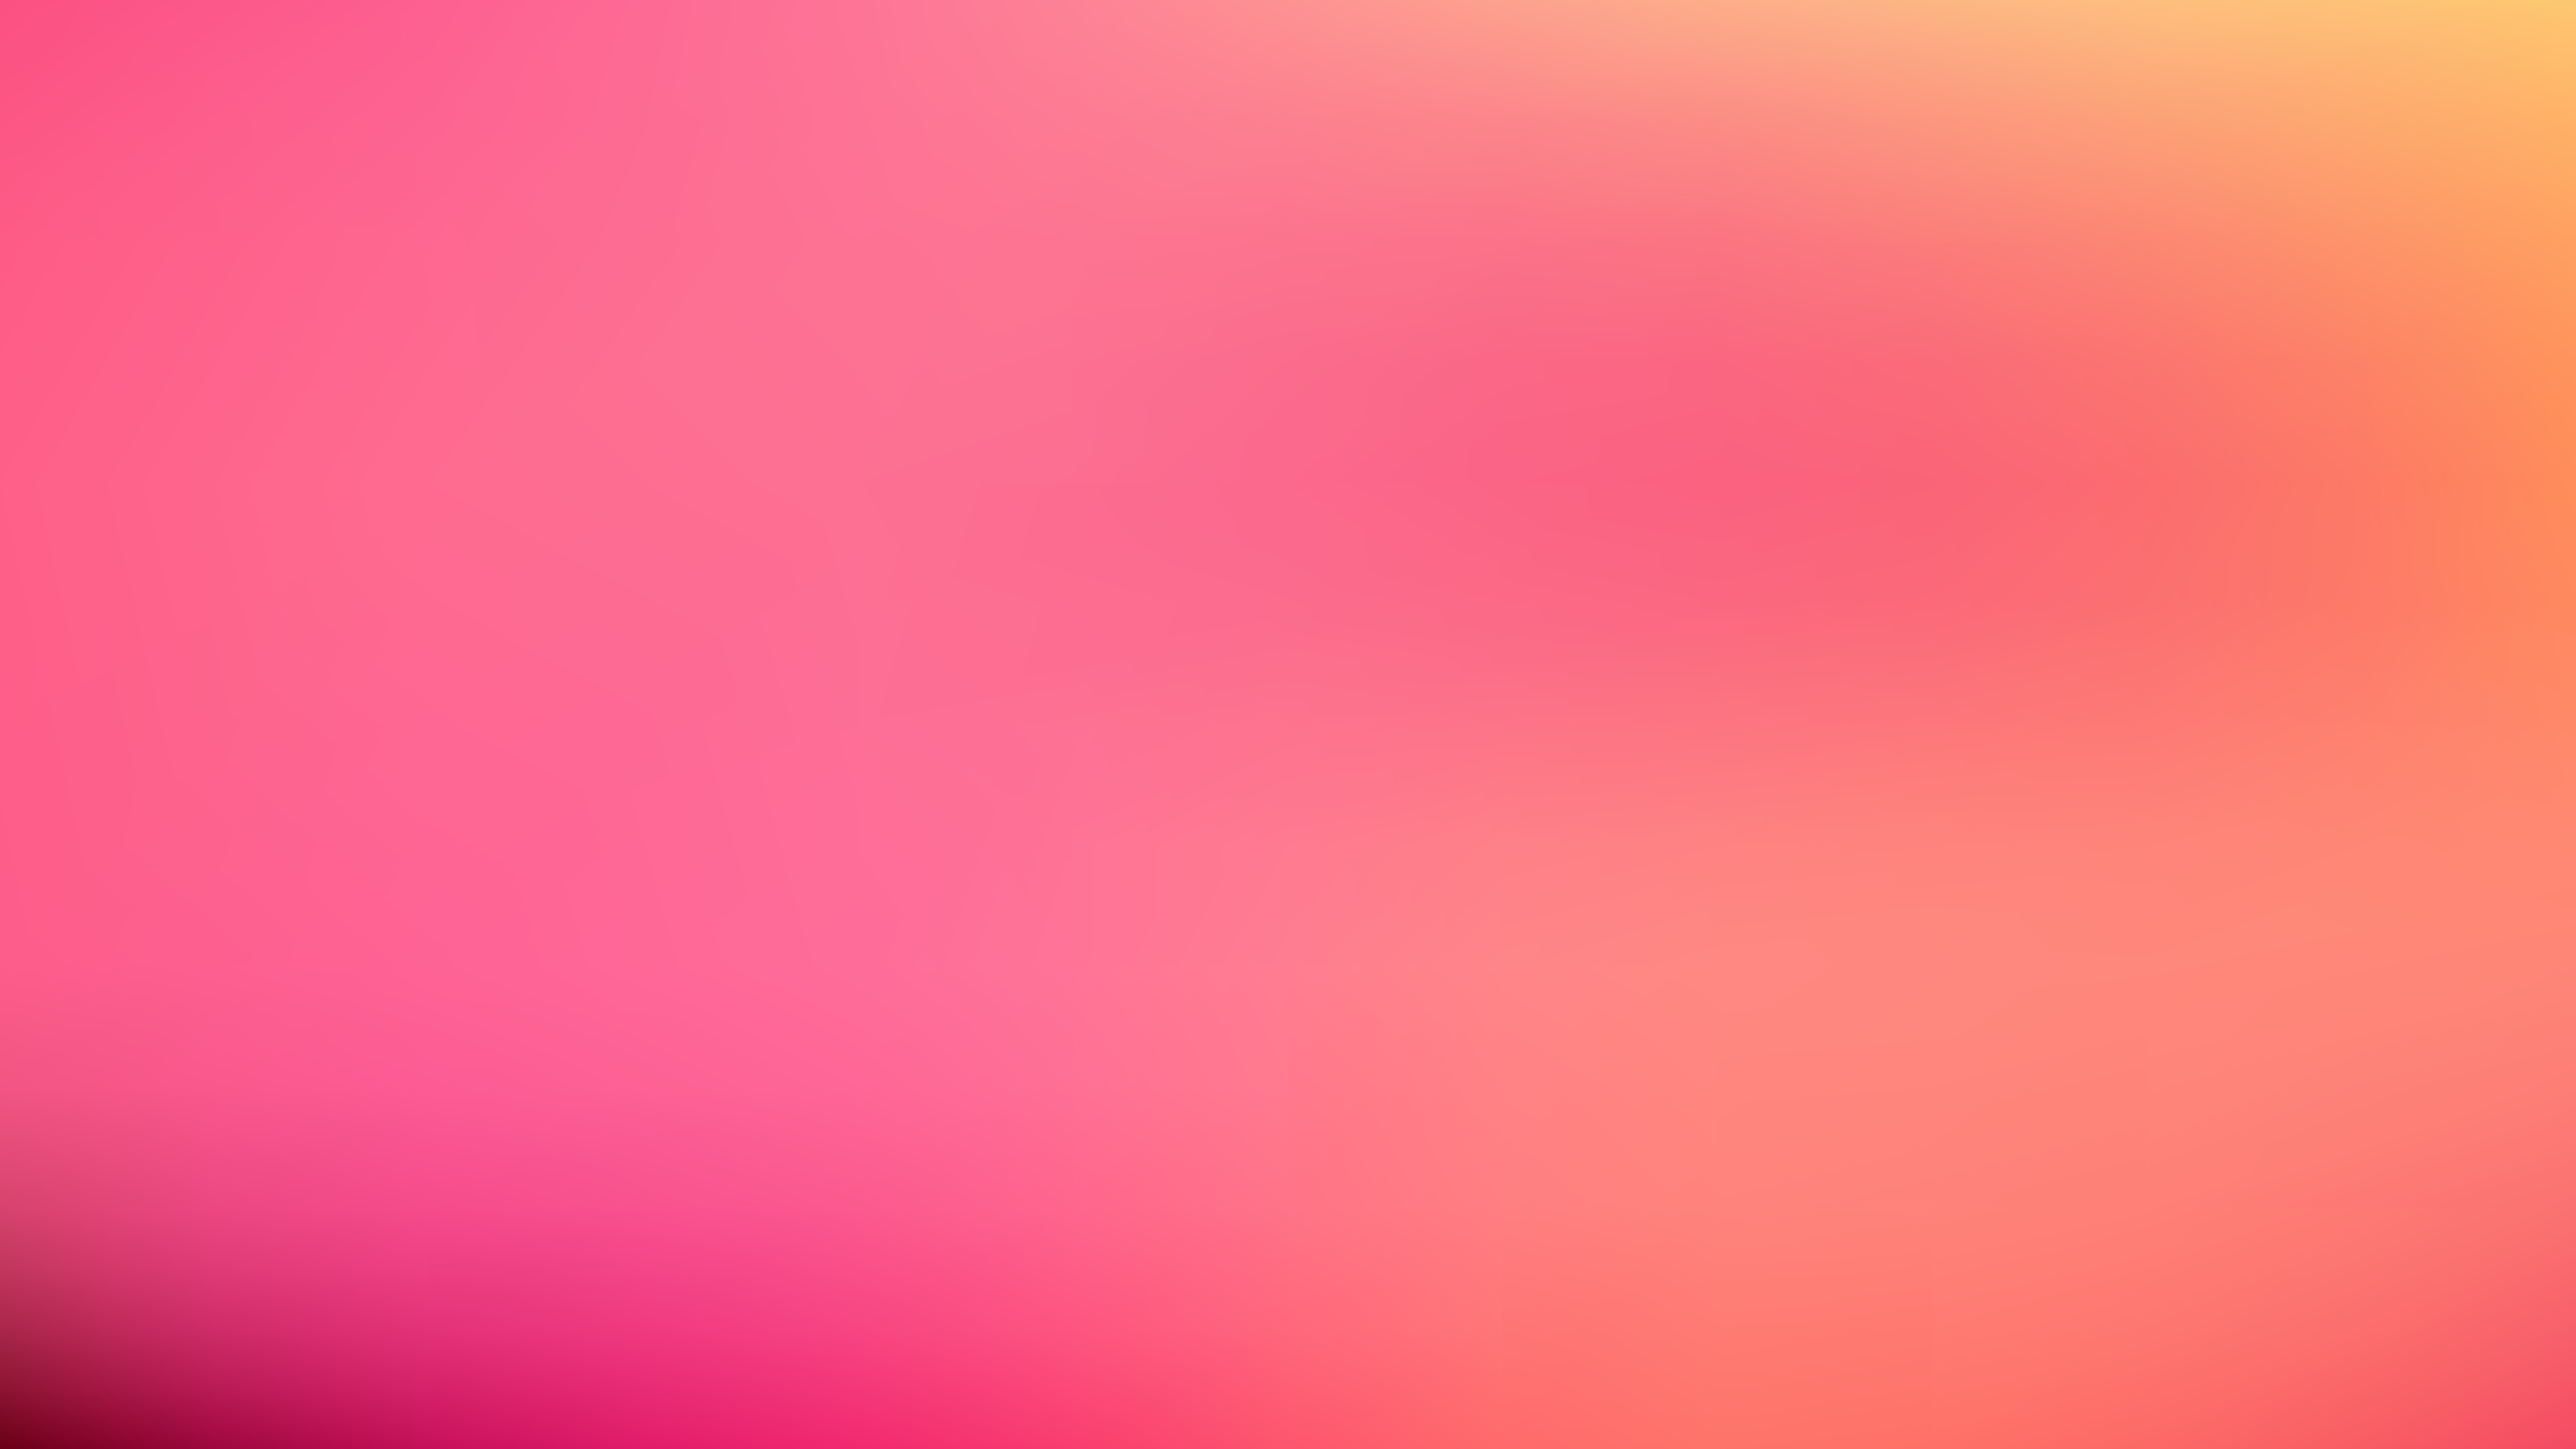 Free Pink and Yellow Professional PowerPoint Background